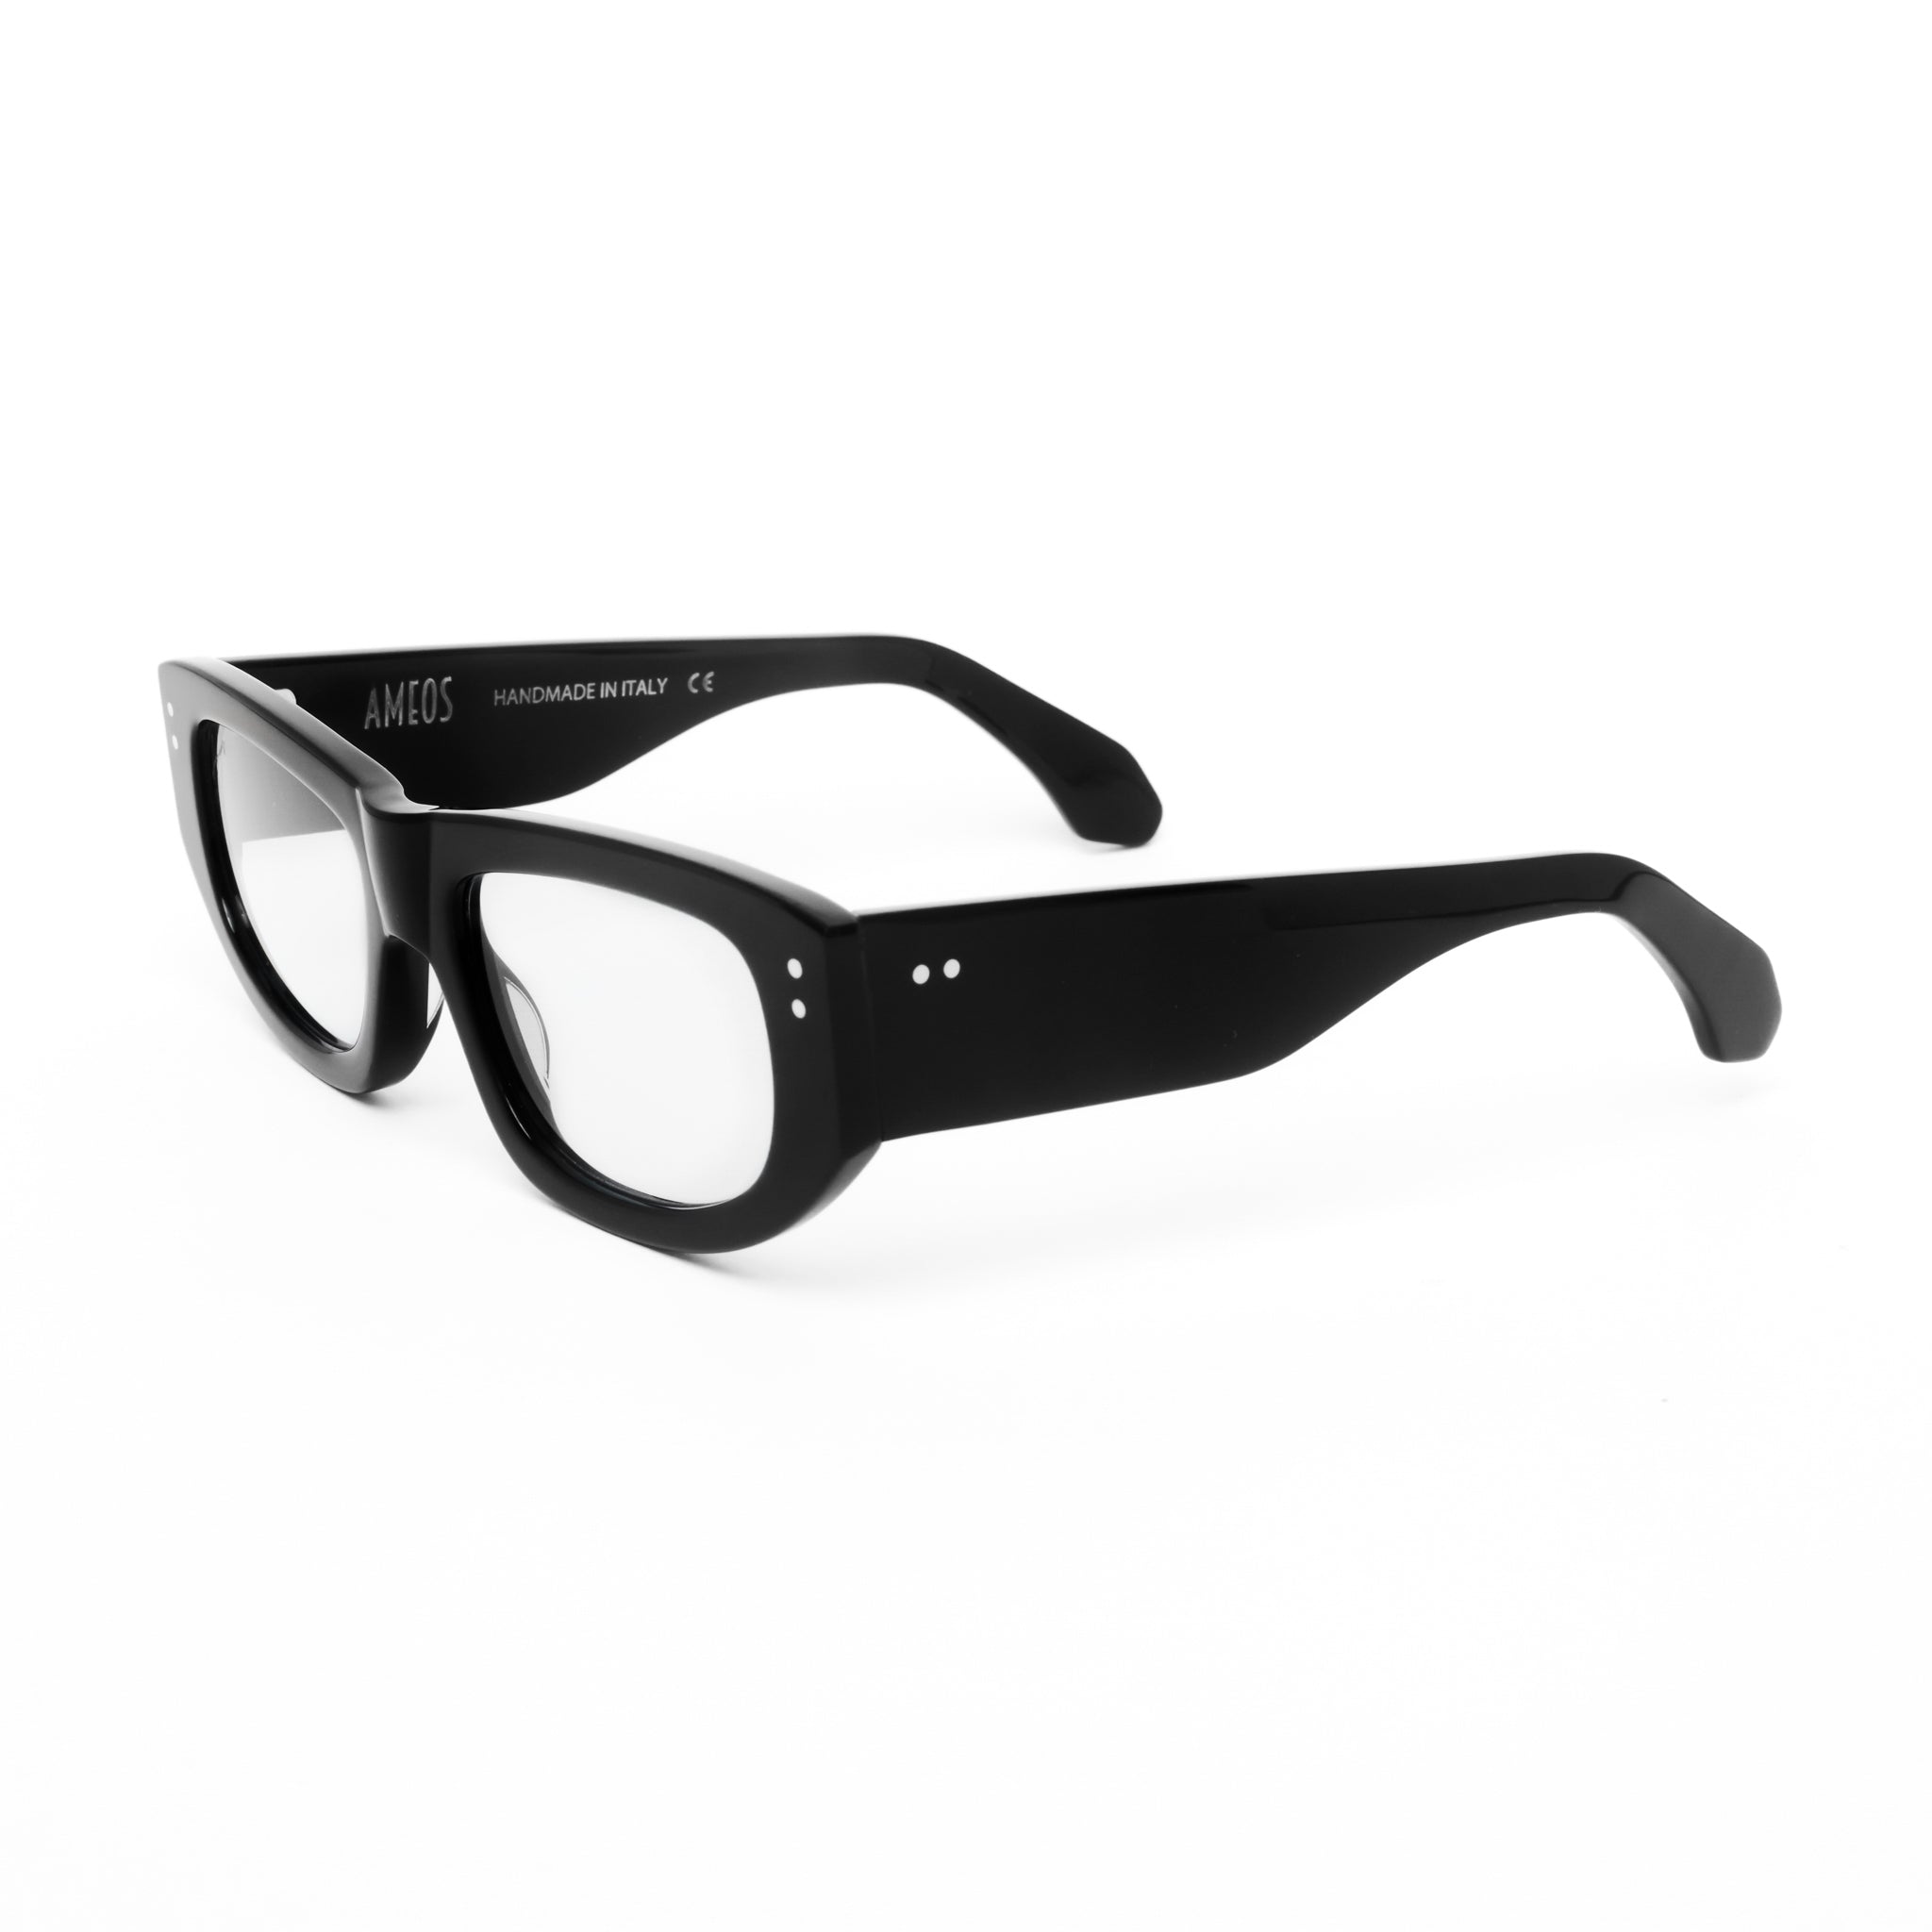 Ameos Forever collection Max optical glasses. Black frames and unisex eyewear